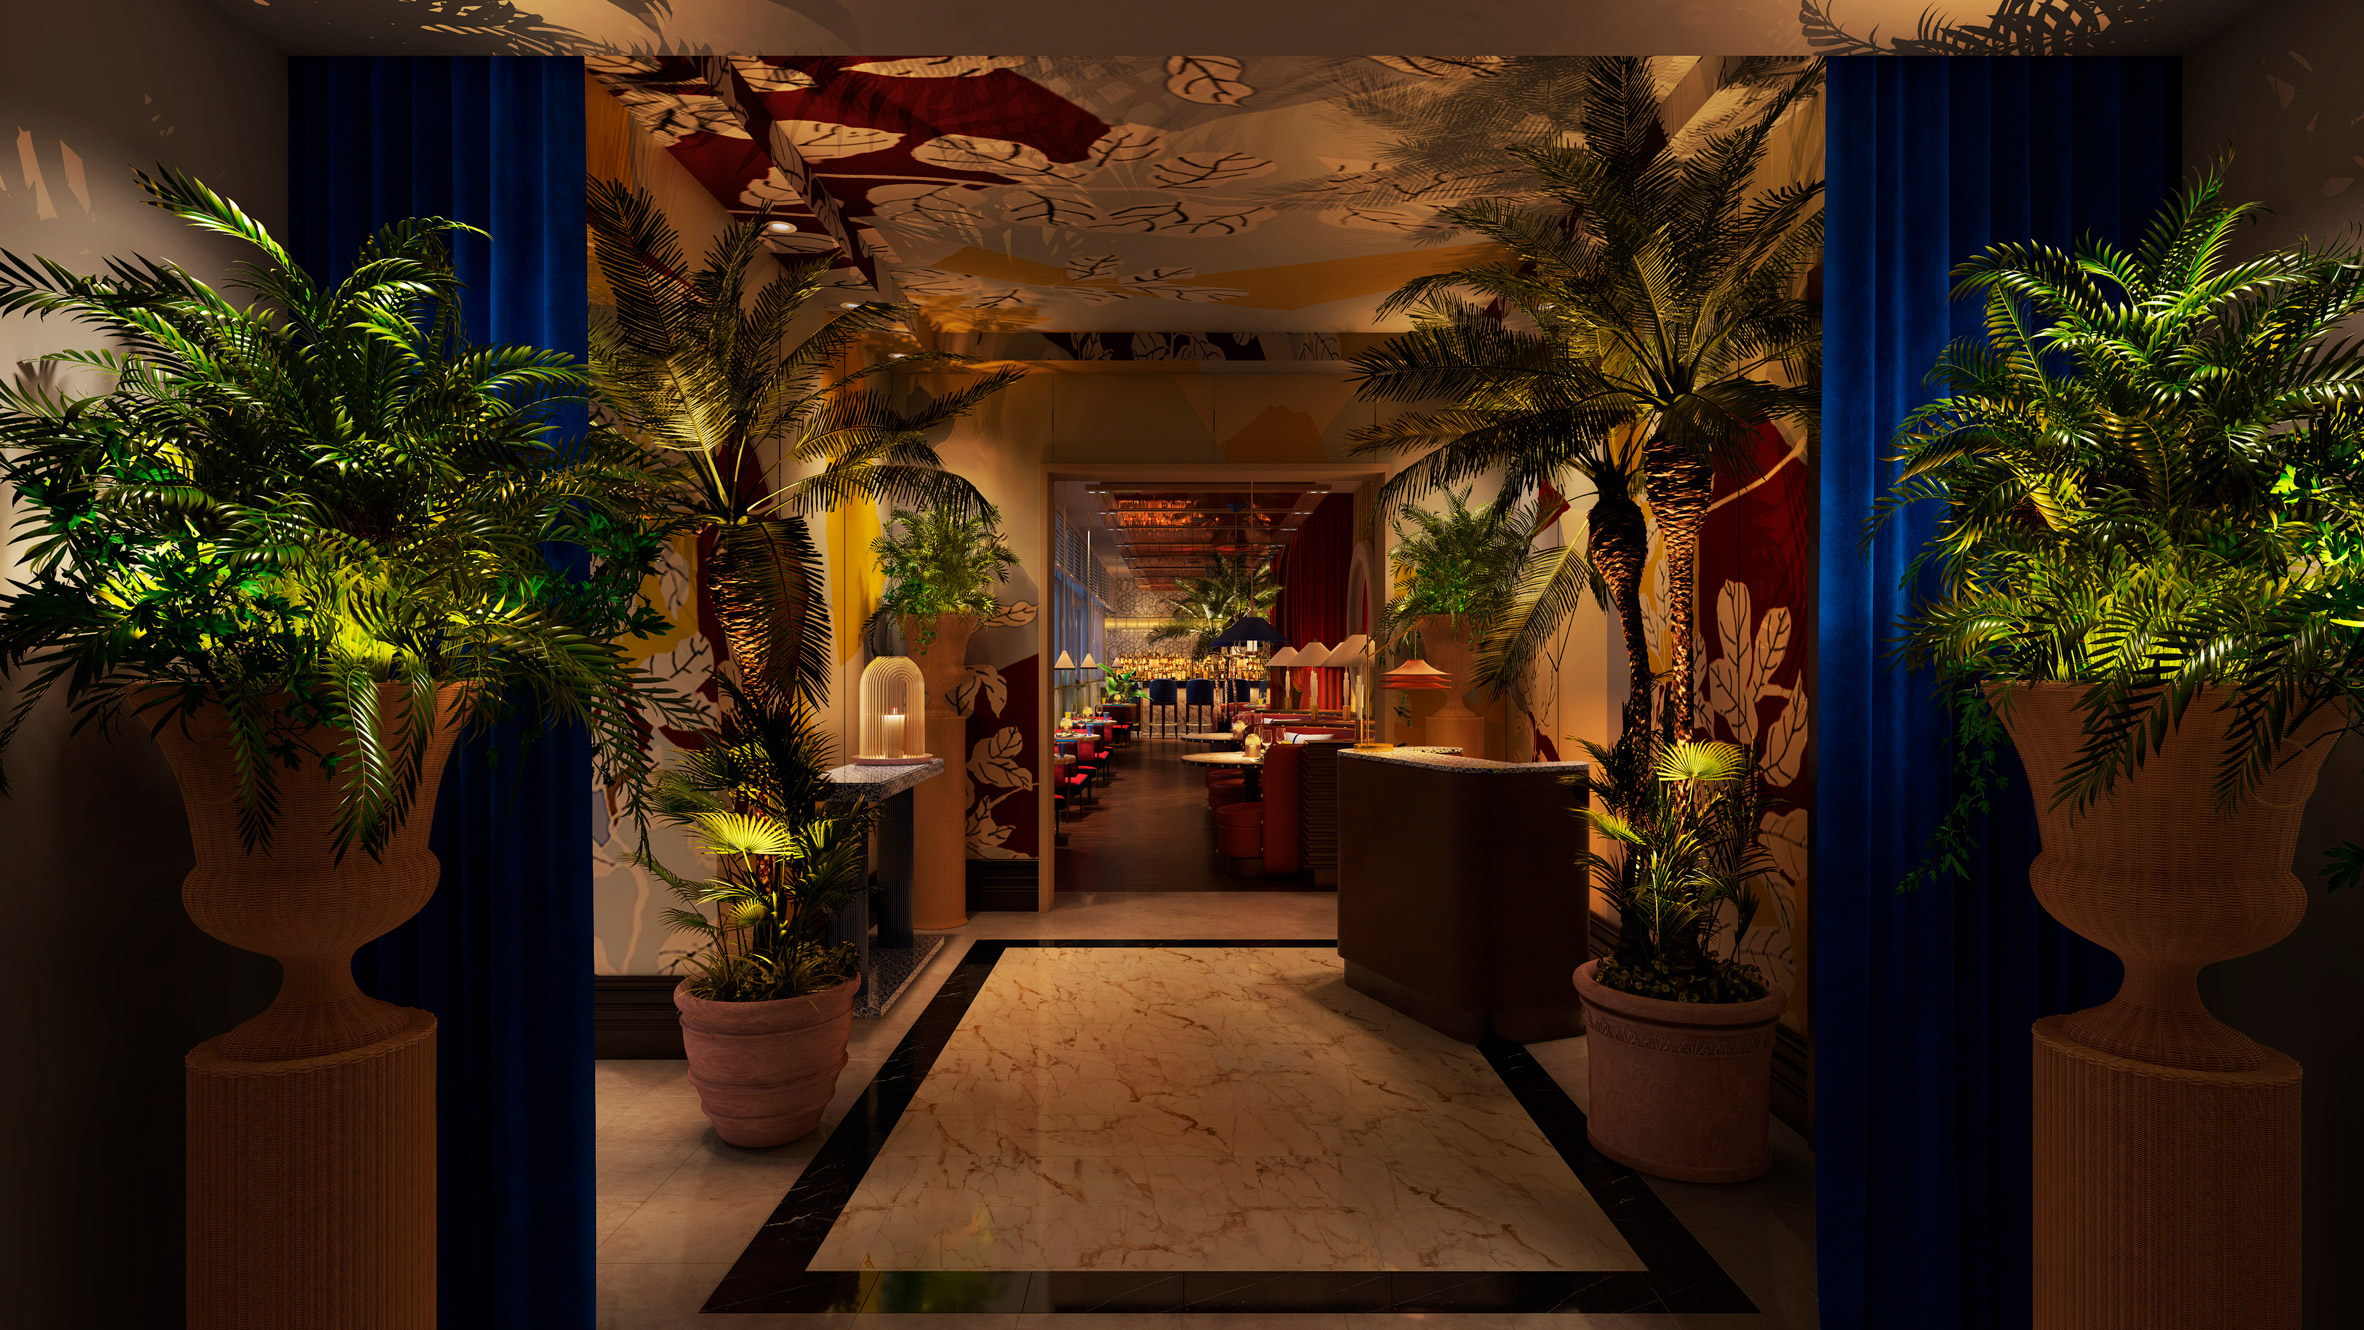 Hotel lobby interior featuring plant-filled interiors